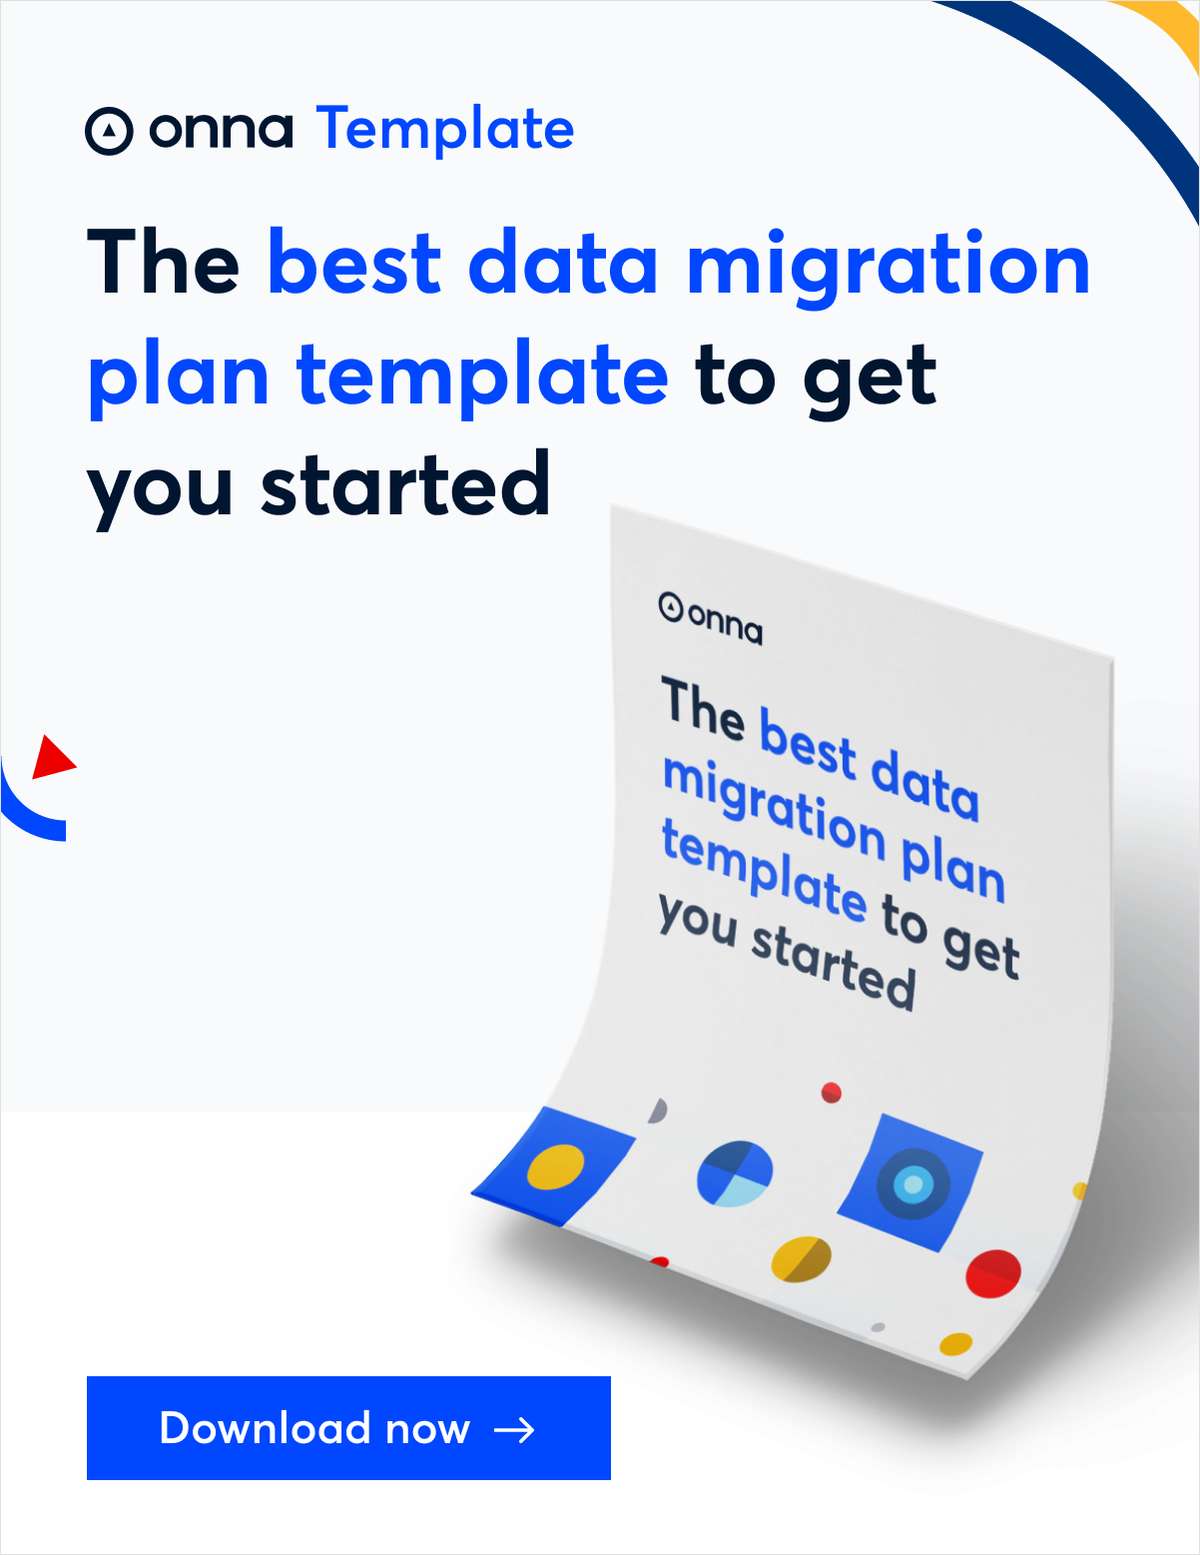 The best data migration plan template to get you started